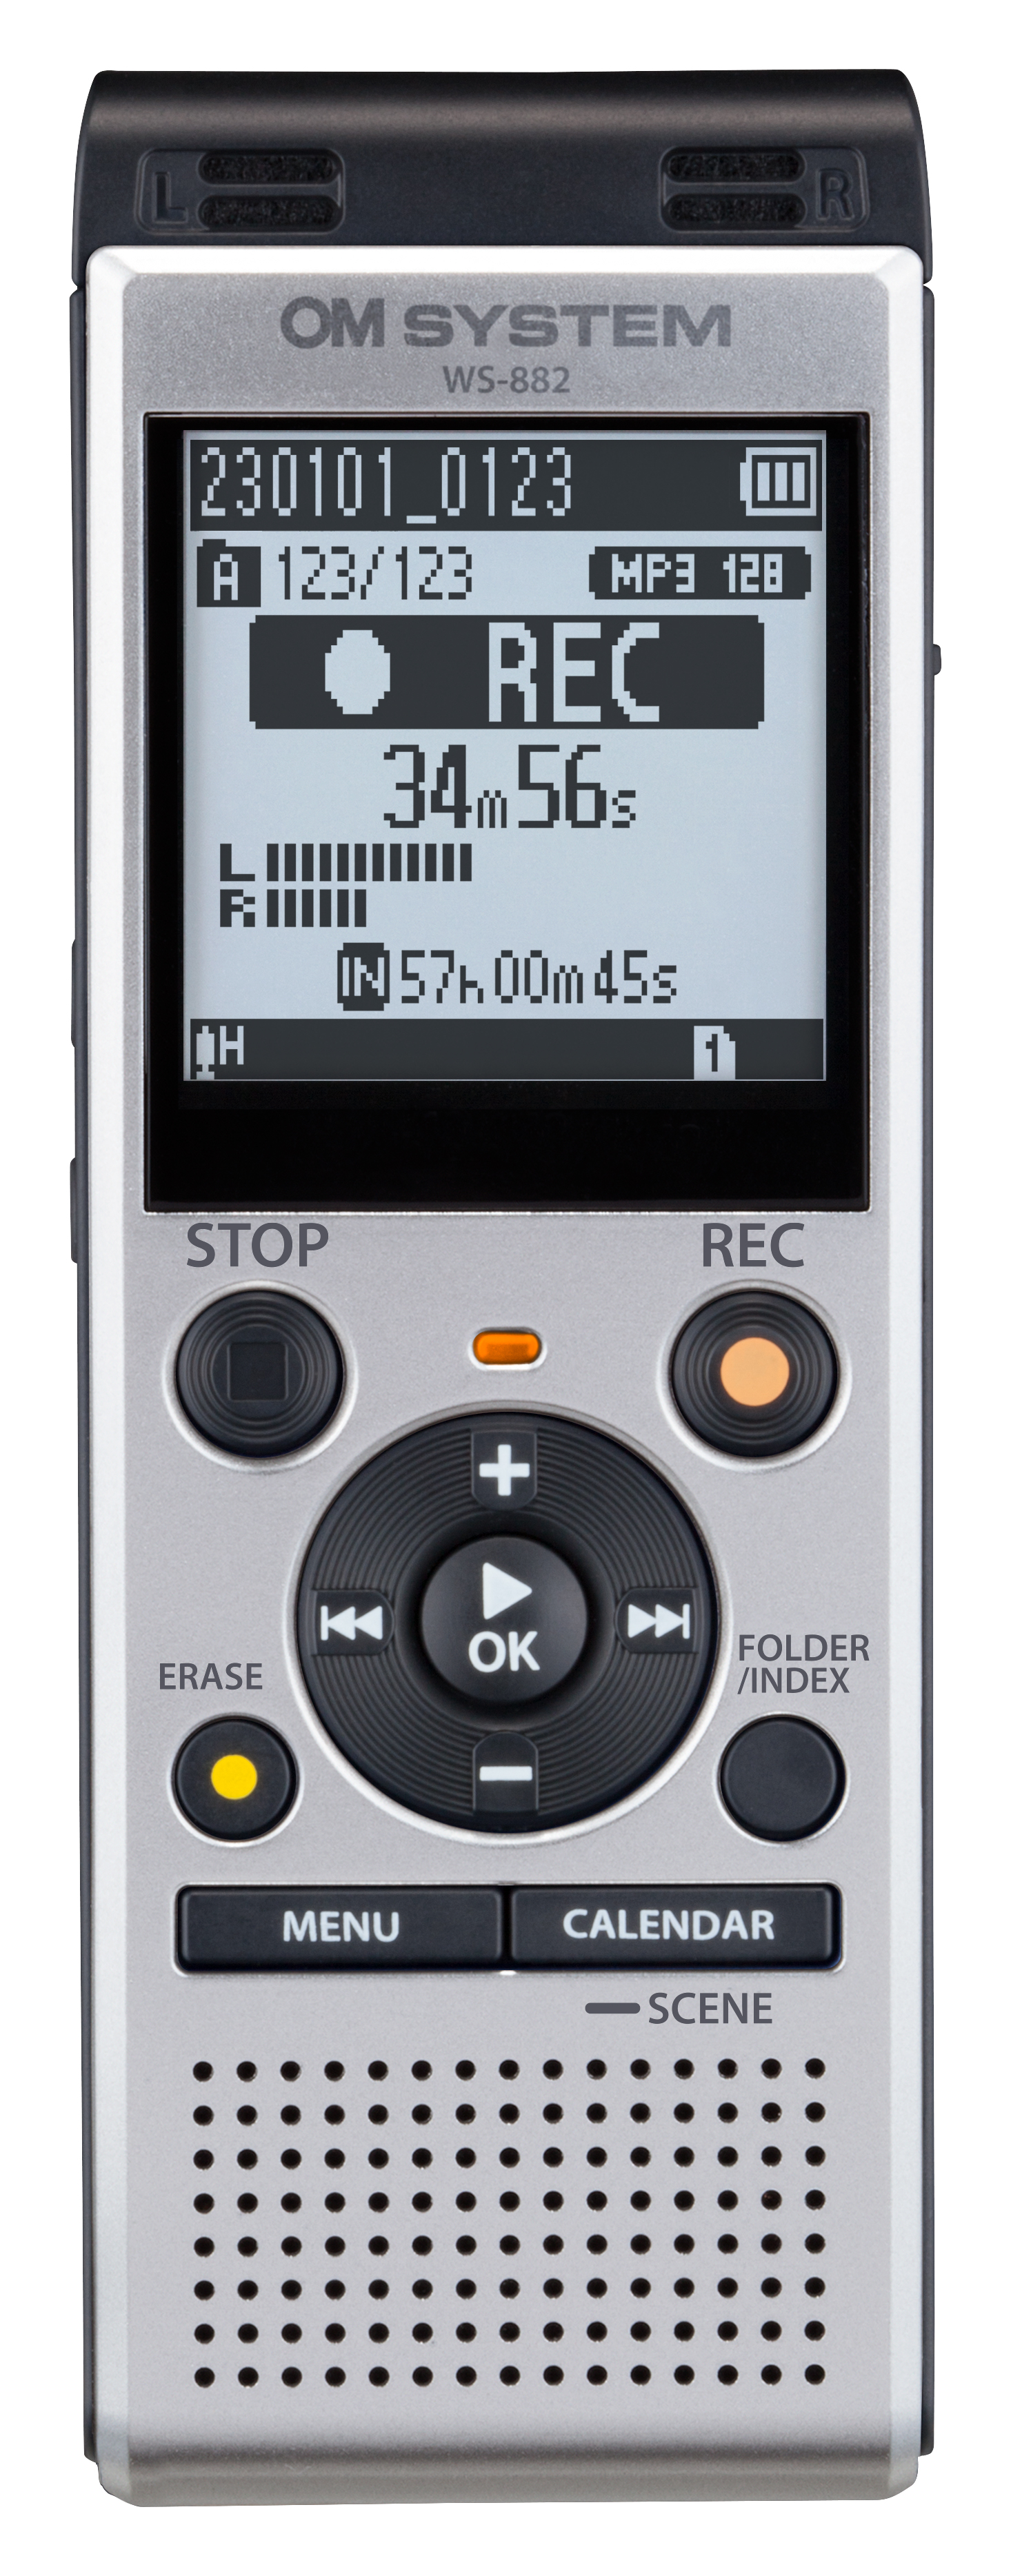 OLY-V420330SU000 OLYMPUS WS-882 SILVER DIGITAL VOICE RECORDER,4GB,USB DIRECT STAB,LINEAR PCM/MP3 RECORDING FORMATS, 1040 HOURS RECORDING TIME